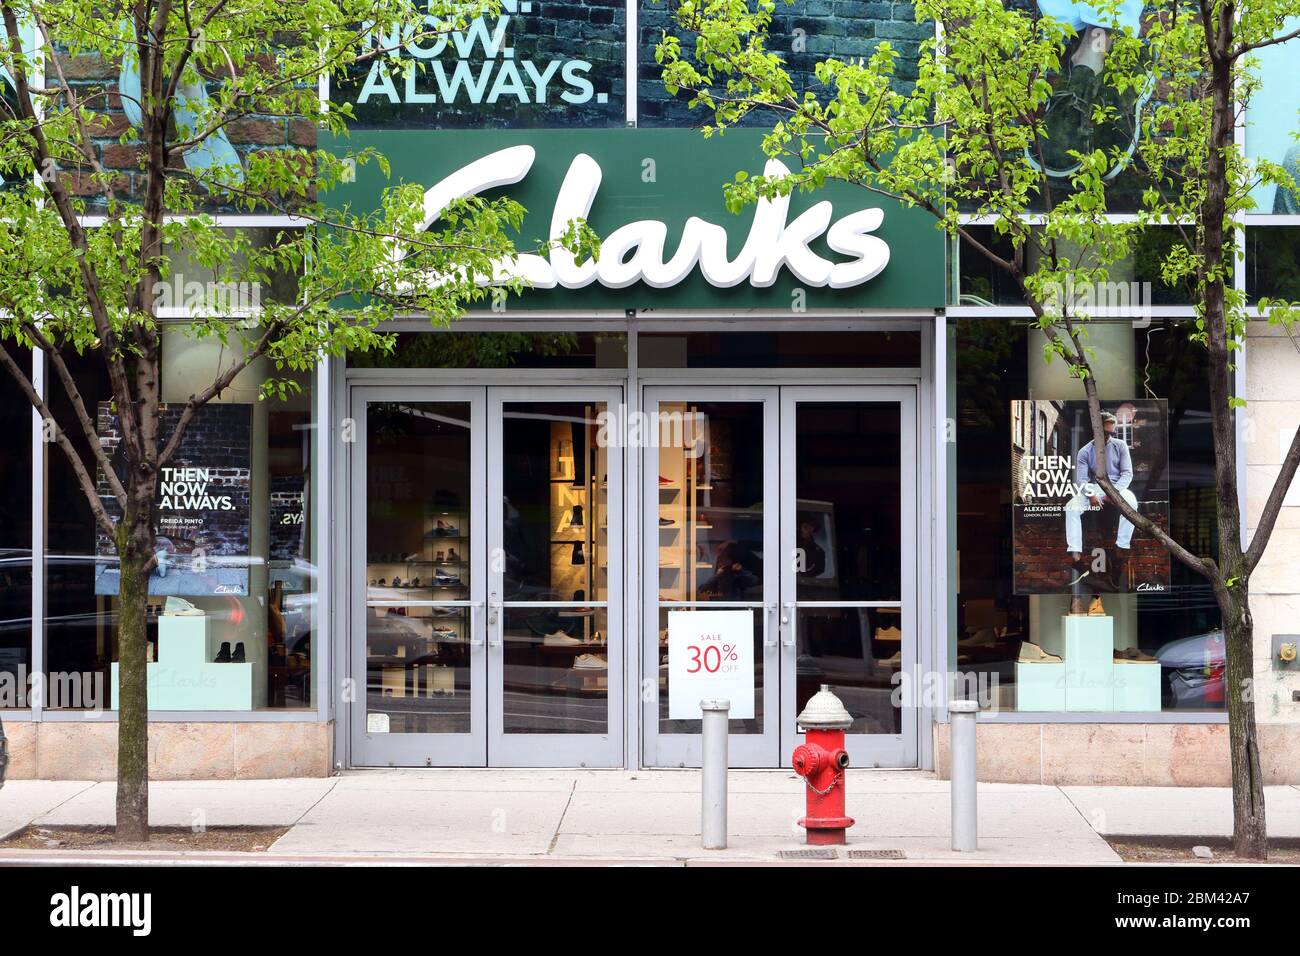 clarks shoes store in manhattan